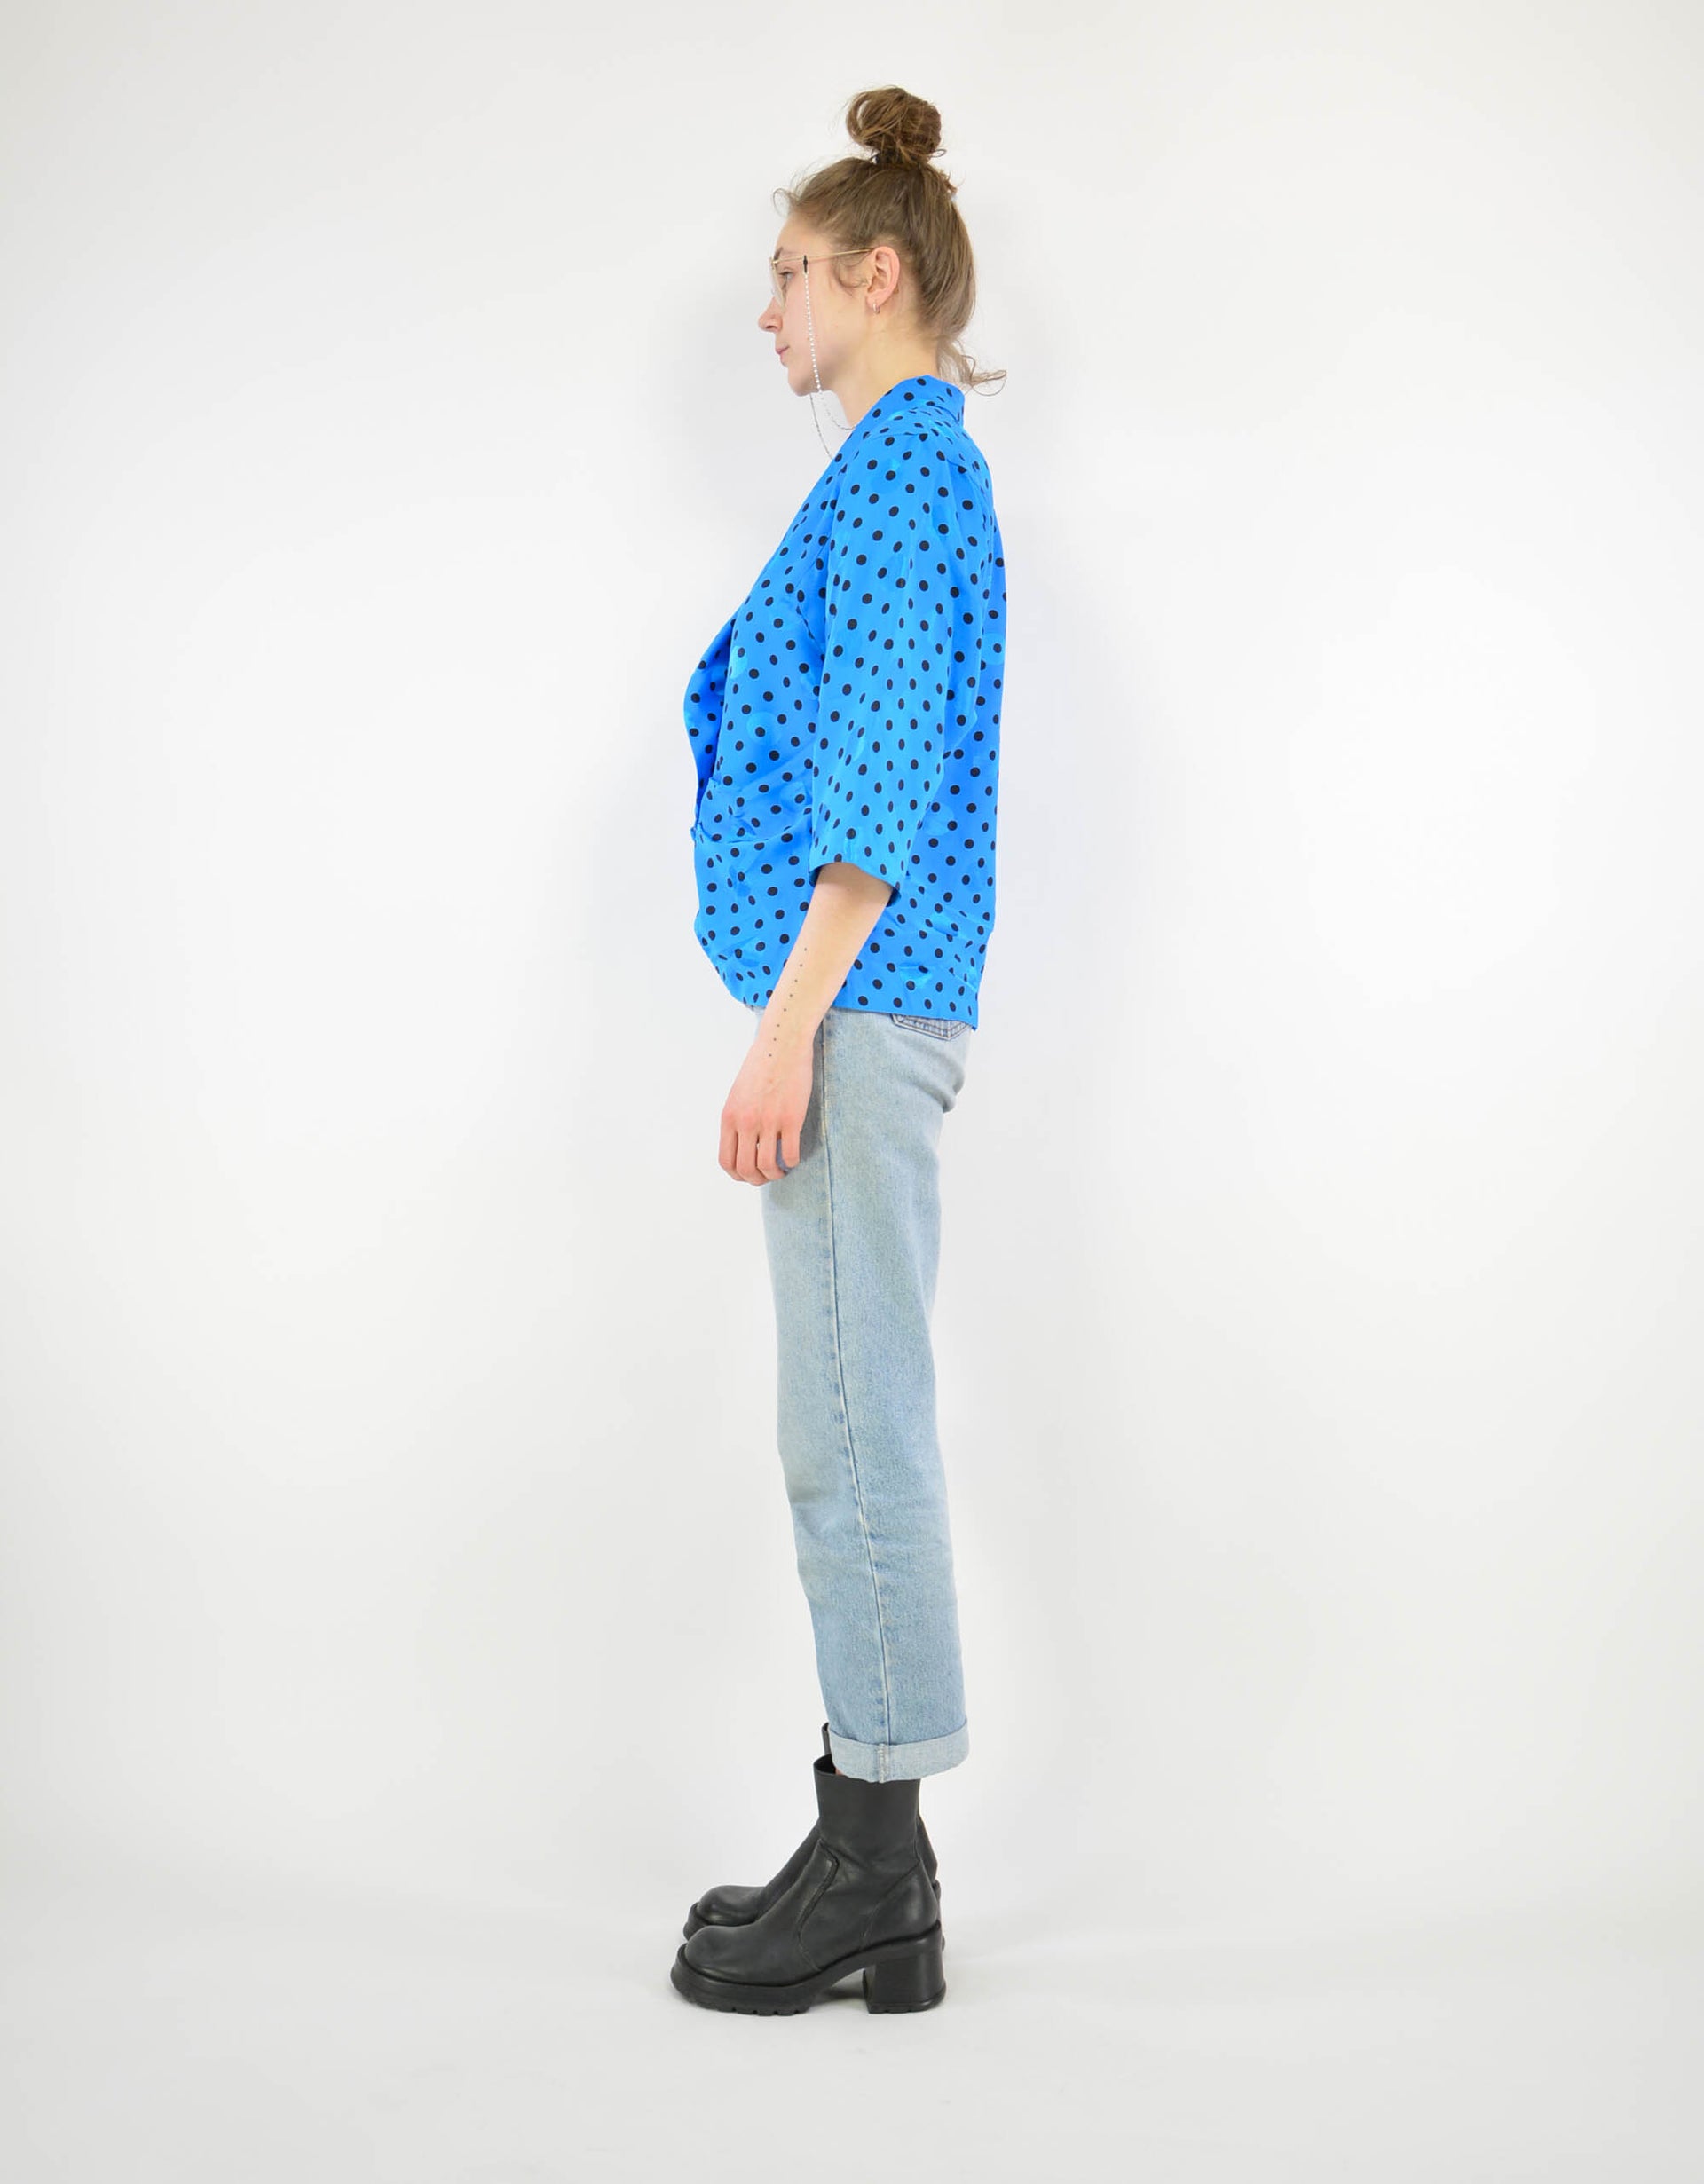 Blue dotted blouse - PICKNWEIGHT - VINTAGE KILO STORE